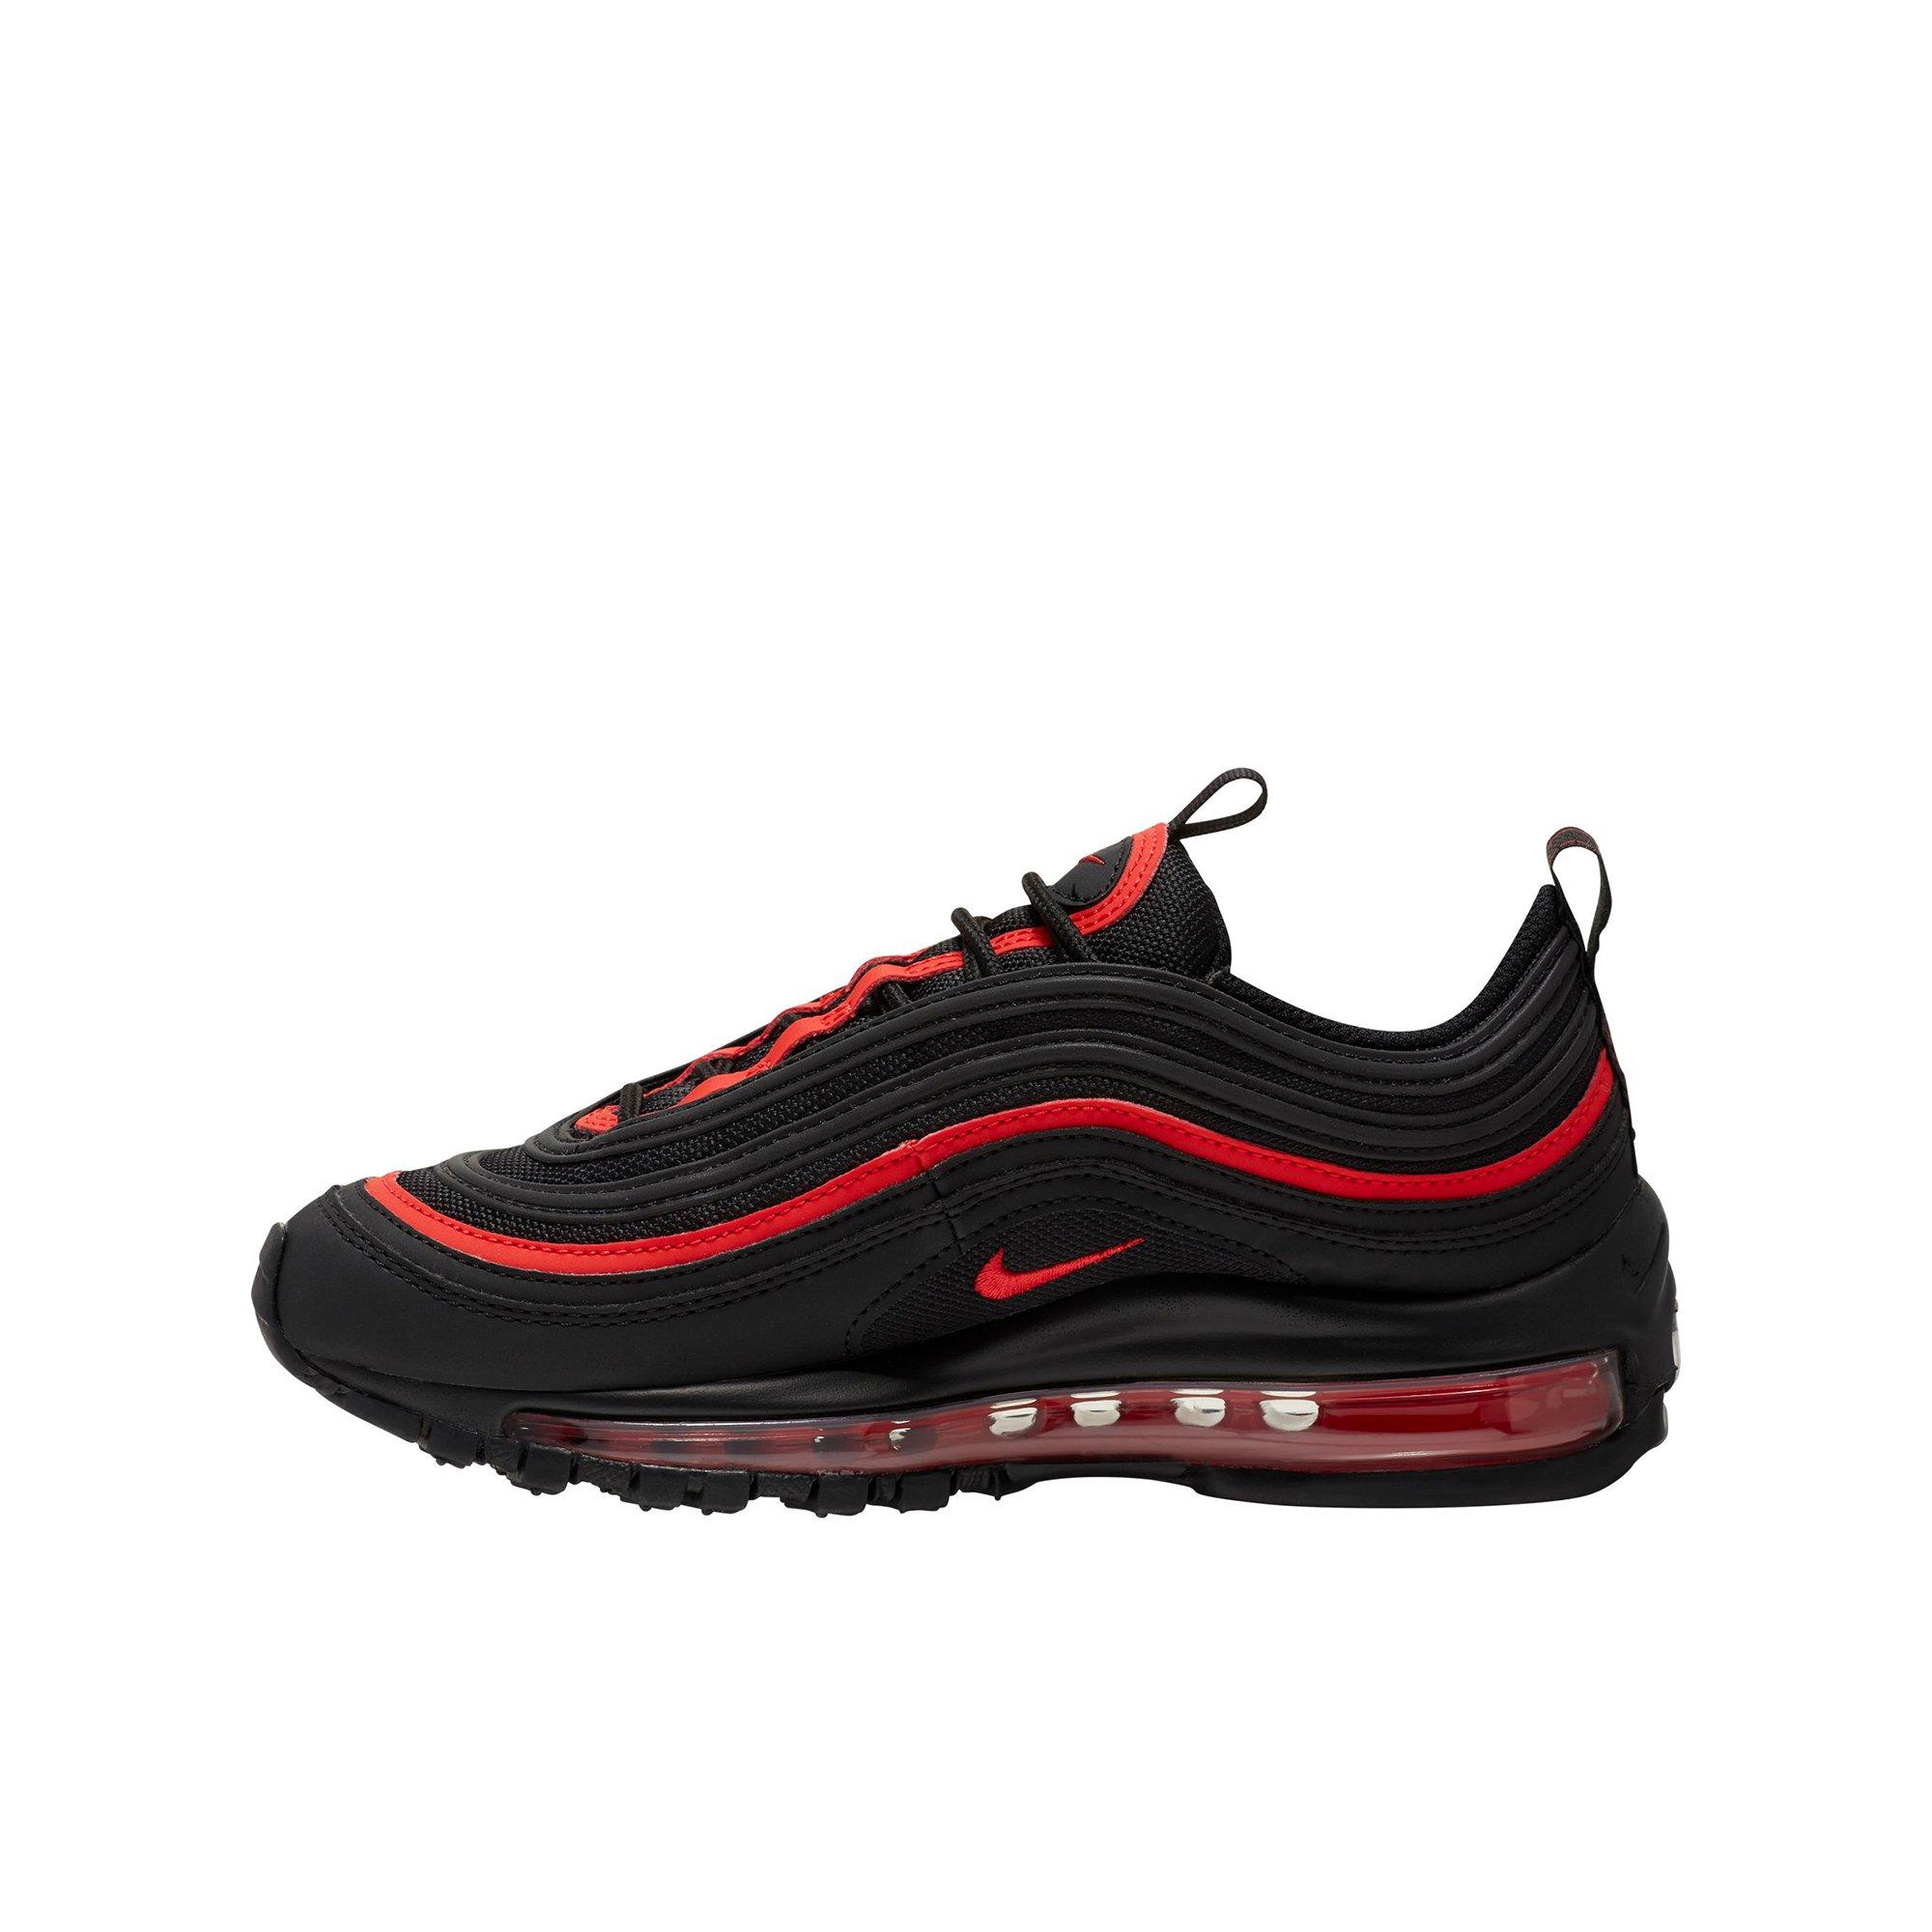 red 97s